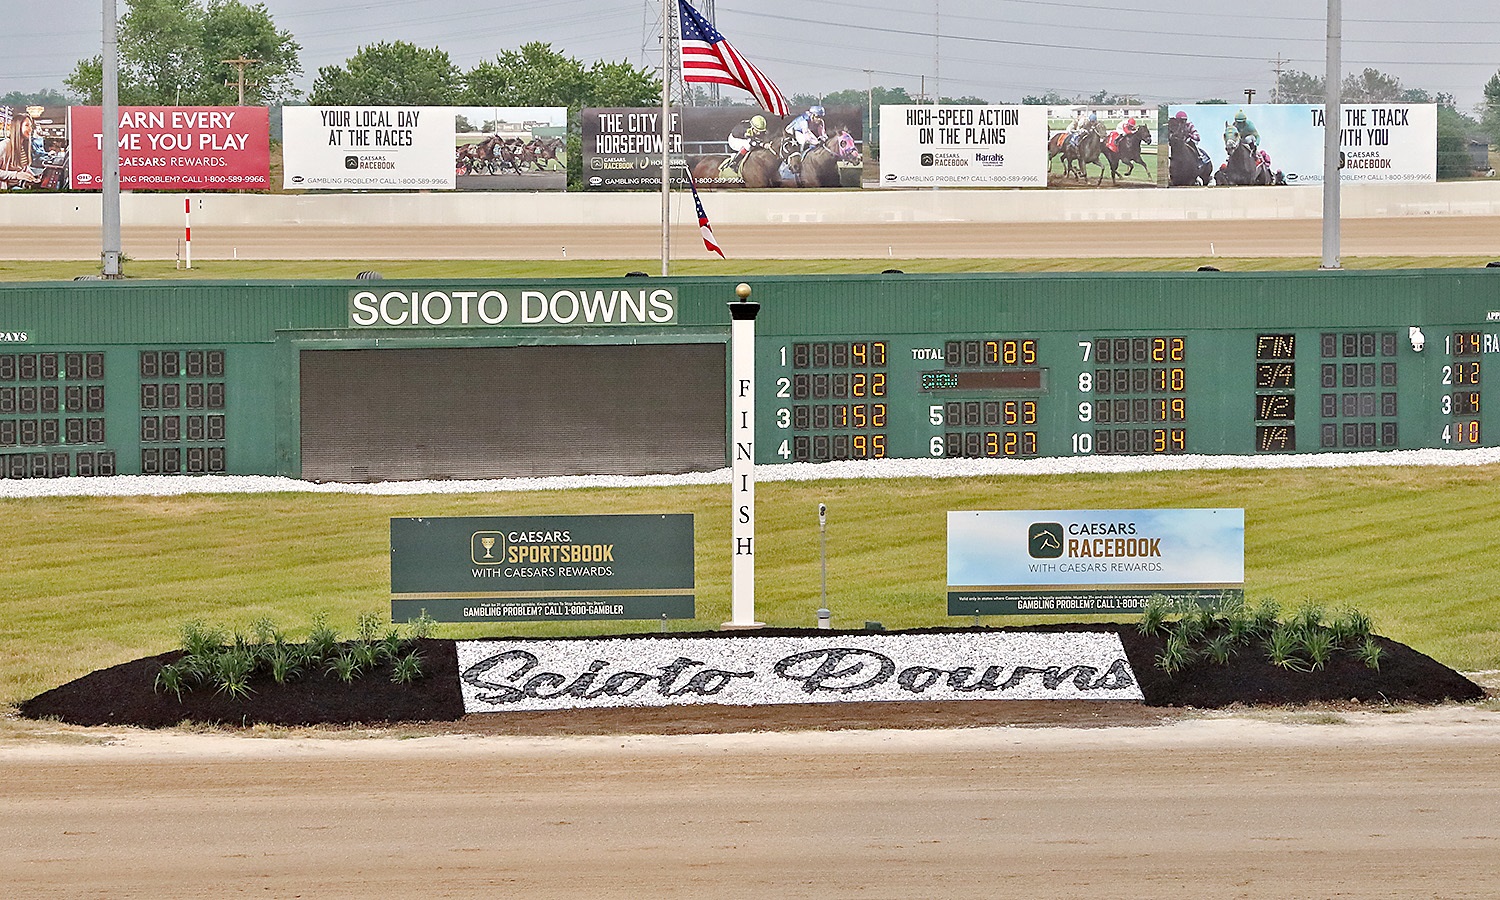 16 races per night opening weekend at Scioto Downs